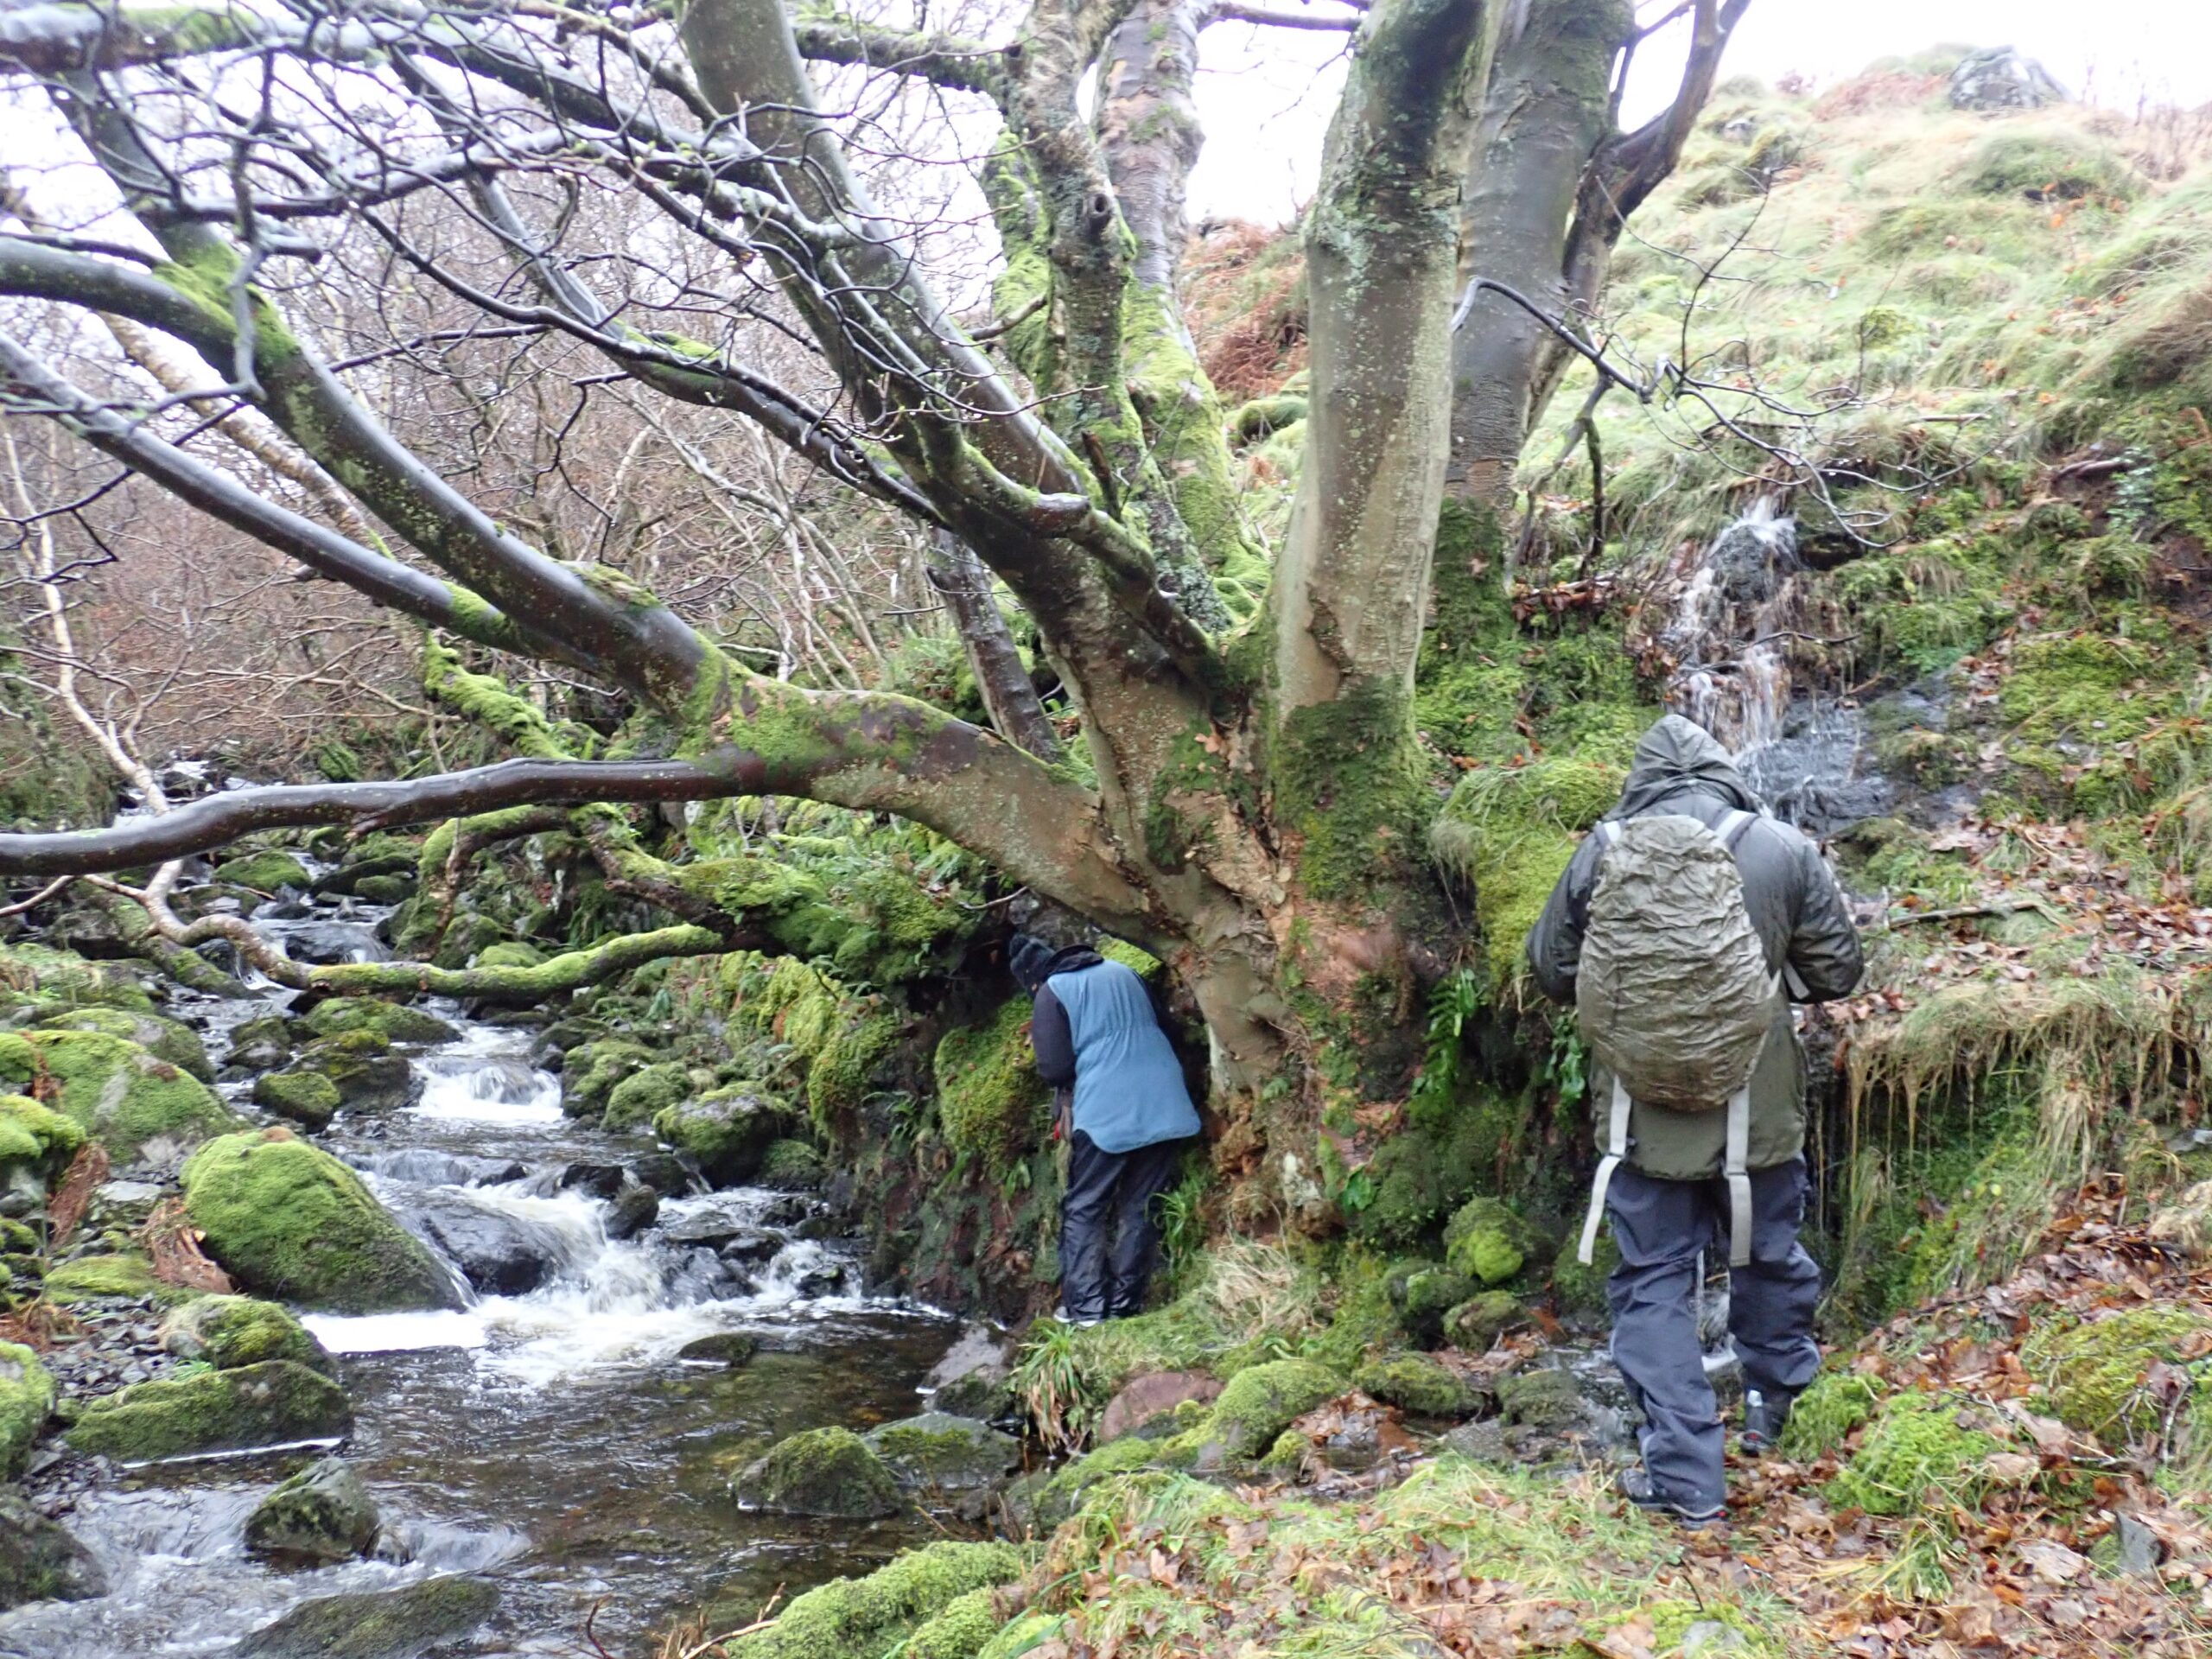 Examining the bryophytes on damp vertical banks above the beck